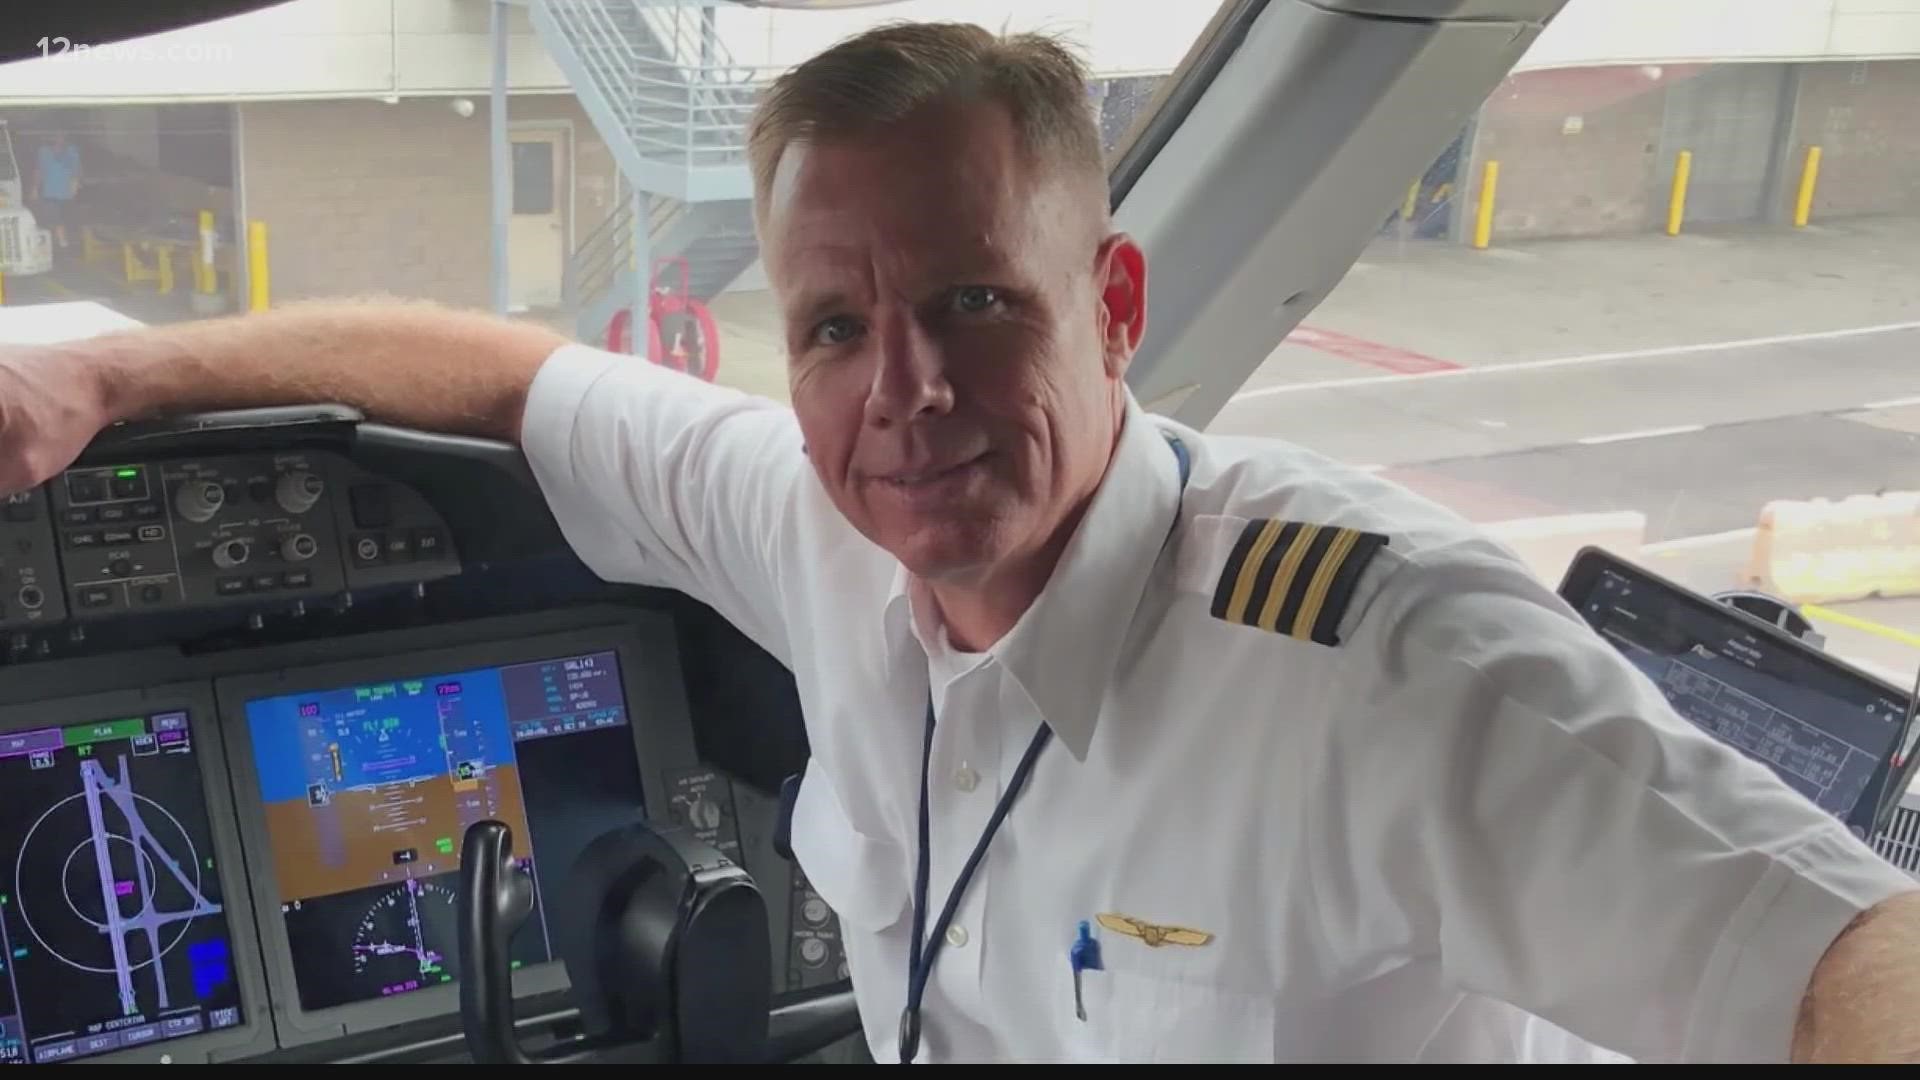 A United Airlines pilot based in the Valley claims they were put on unpaid leave over the company's vaccine mandate, despite being given a religious exemption.